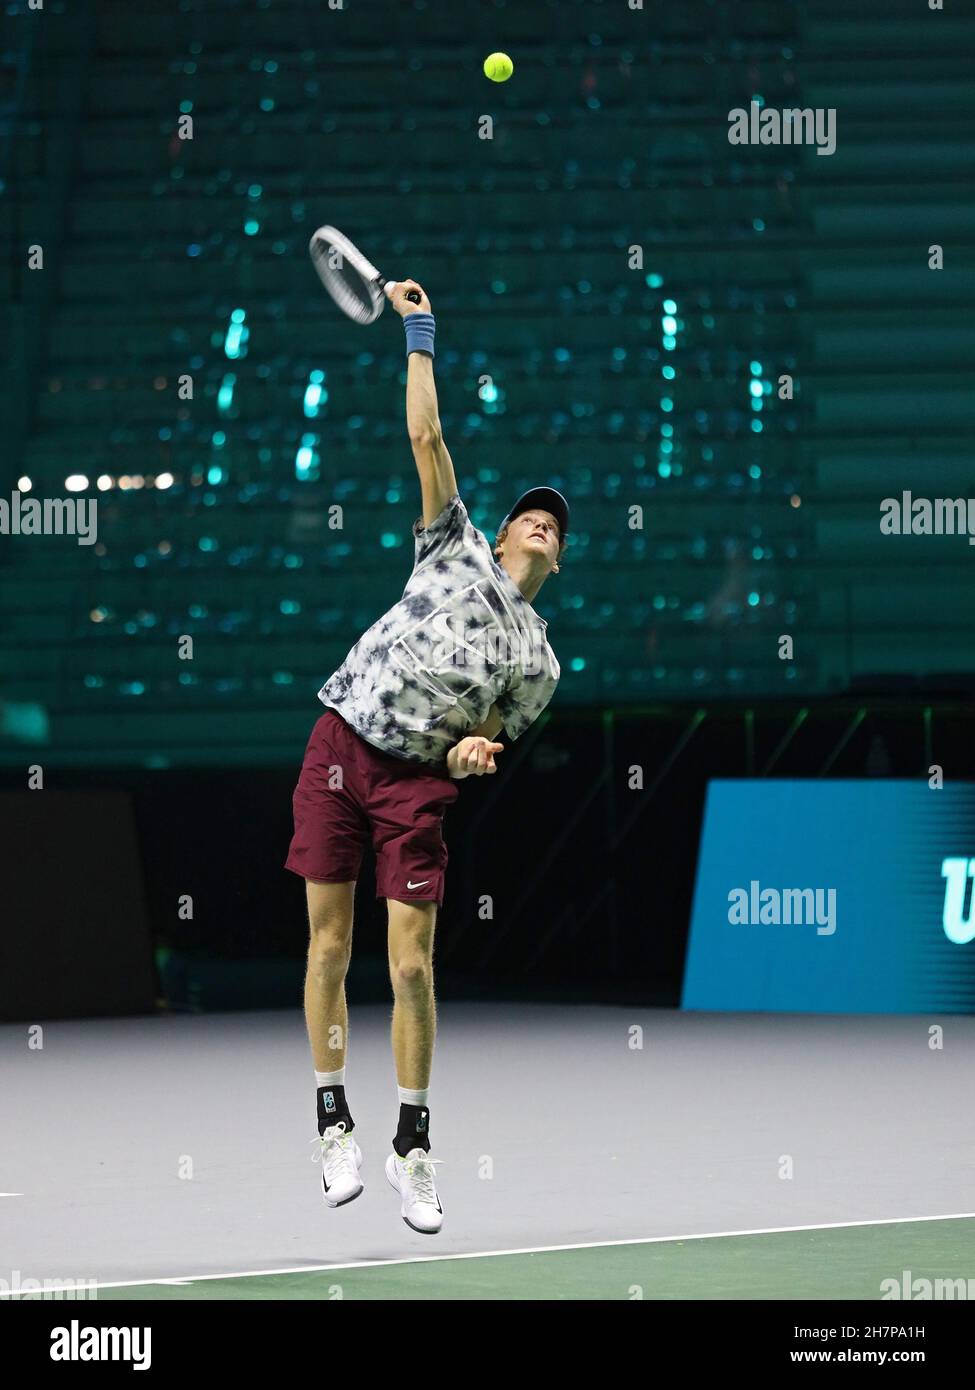 Turin, Italy. 24th Nov, 2021. Training, Tennis Internationals in Turin, Italy, November 24 2021 Credit: Independent Photo Agency/Alamy Live News Stock Photo